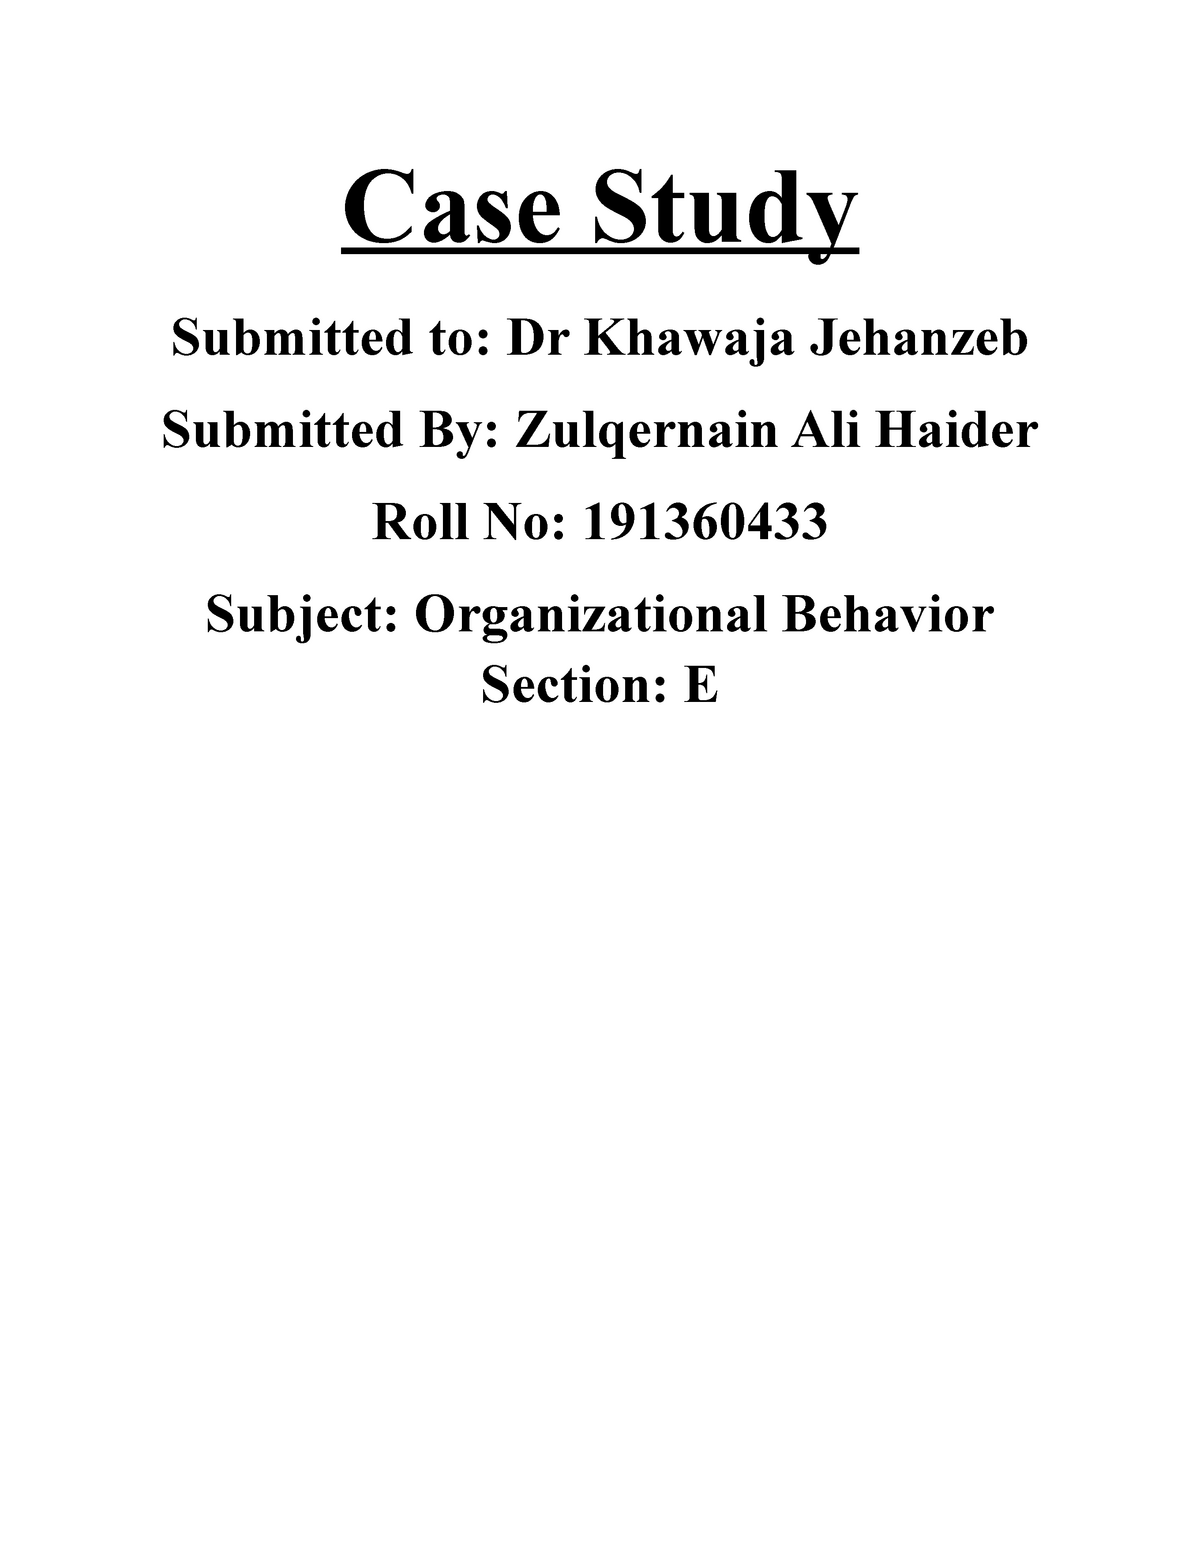 organizational behavior case study questions and answers